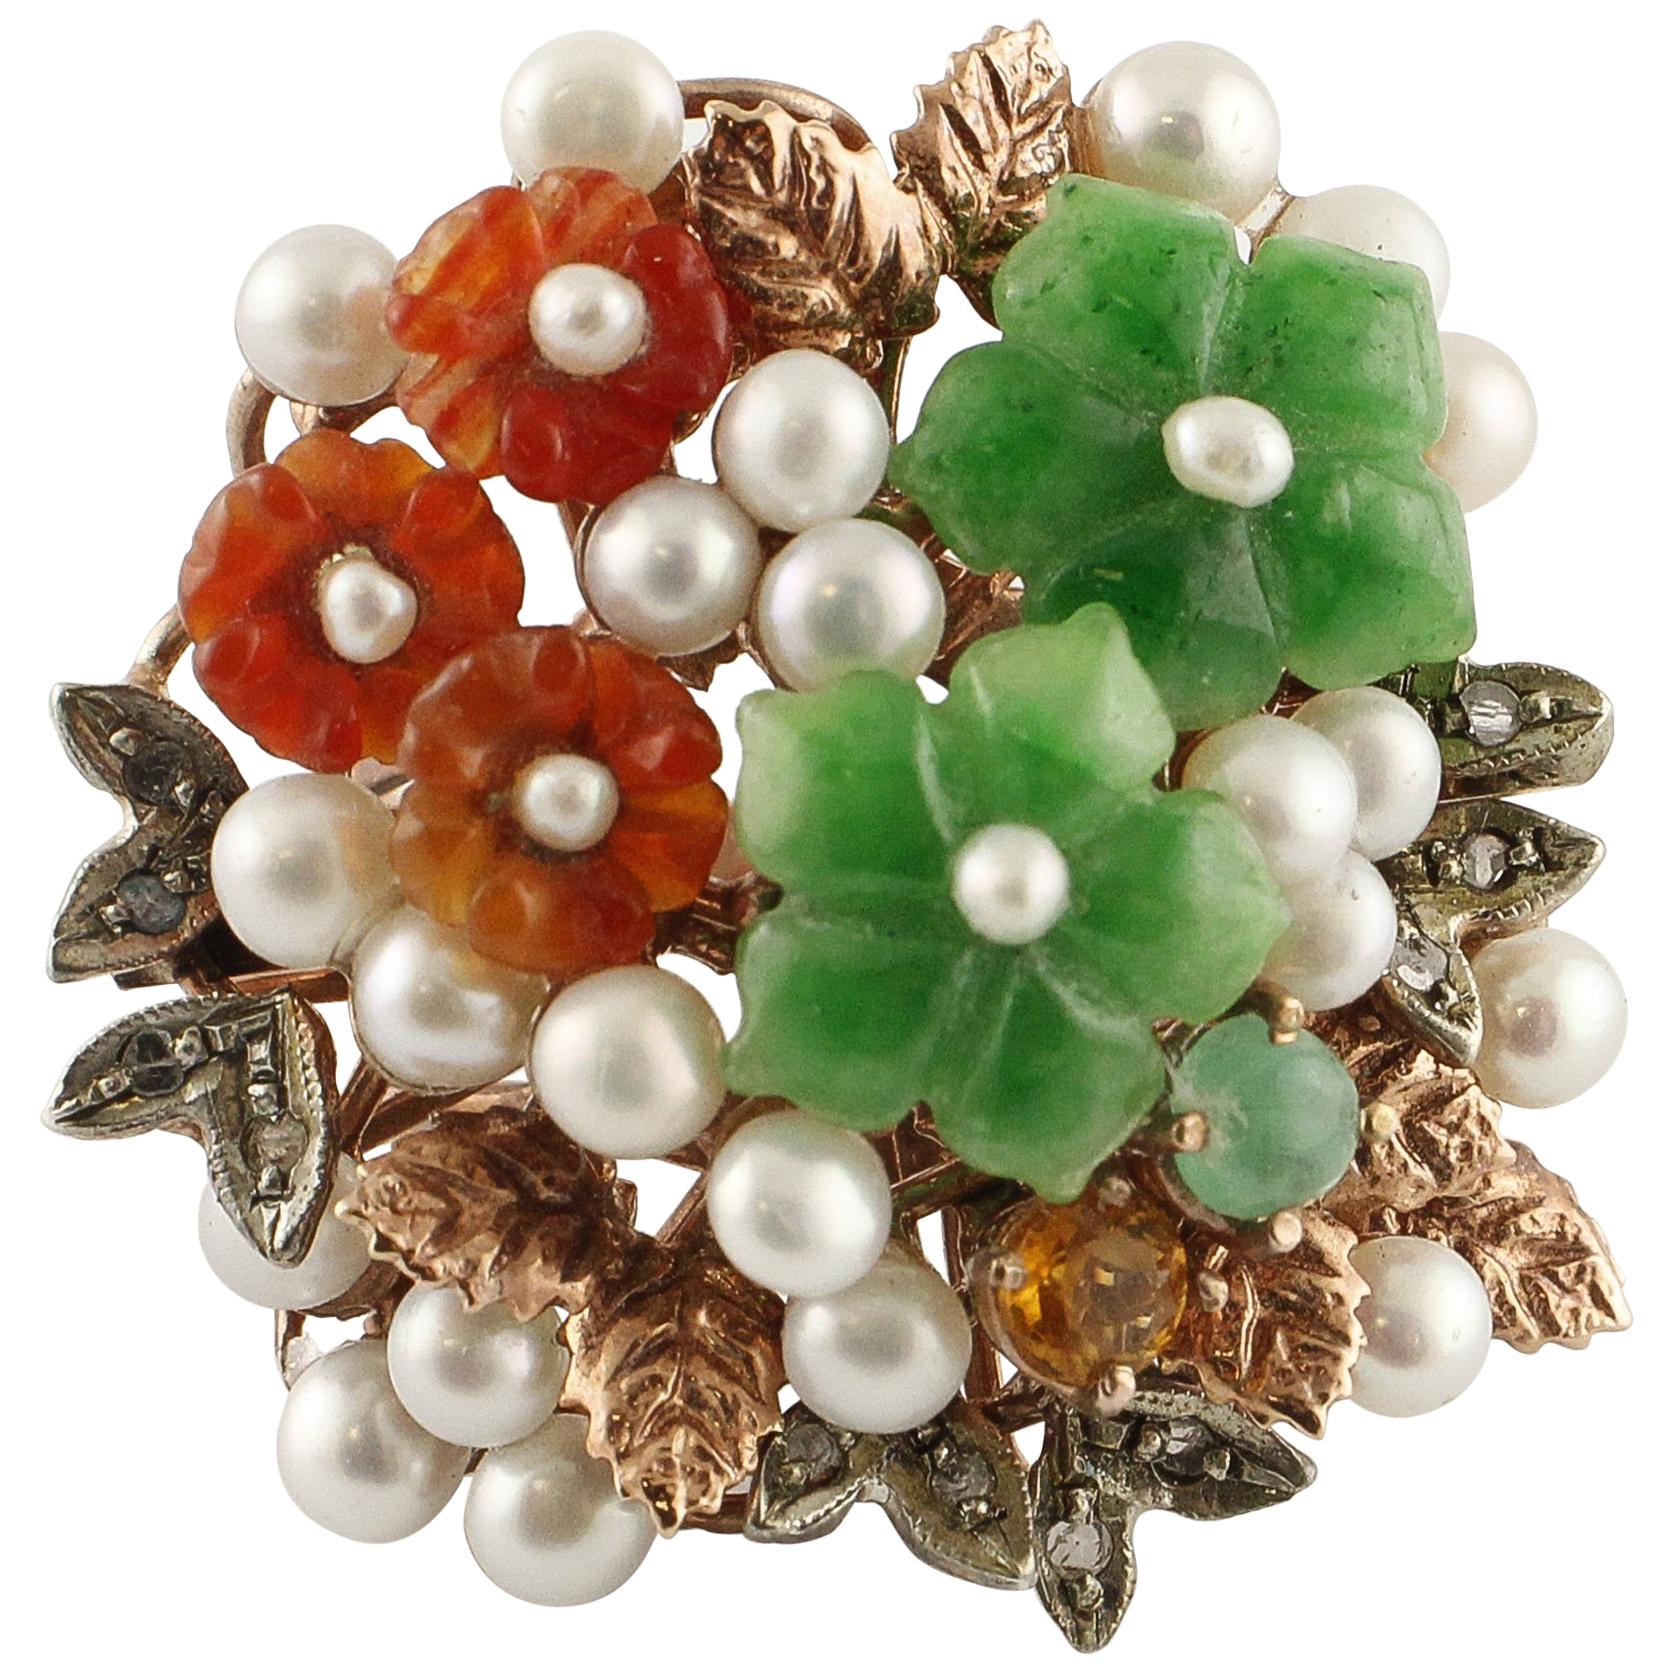 Carnelian, Green Agate, Pearls, Diamonds, 9k gold and silver Flowery Retro Ring